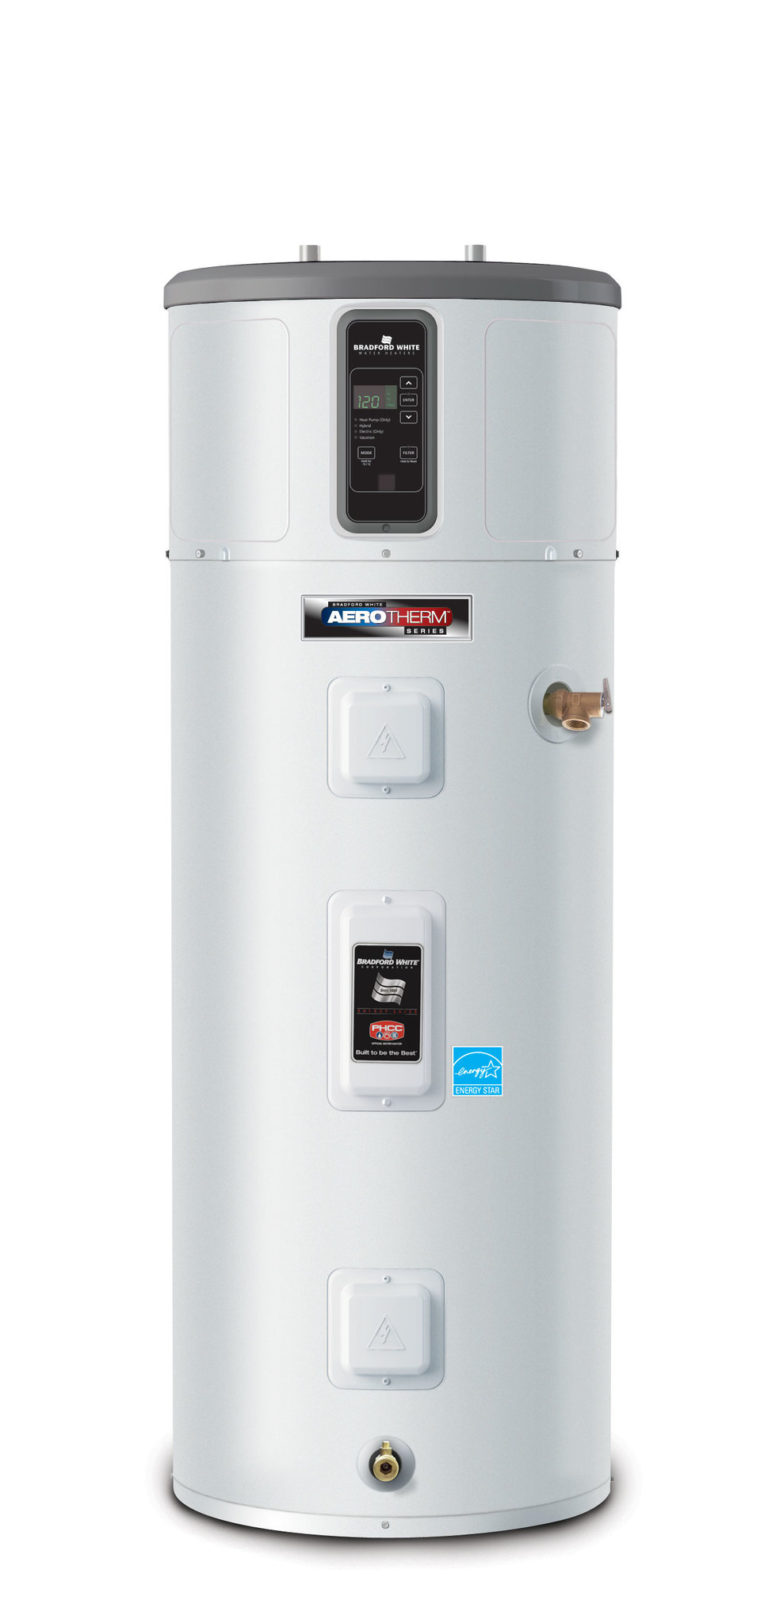 Bradford White Announces Release of NEW AeroTherm® Heat Pump Water Heaters